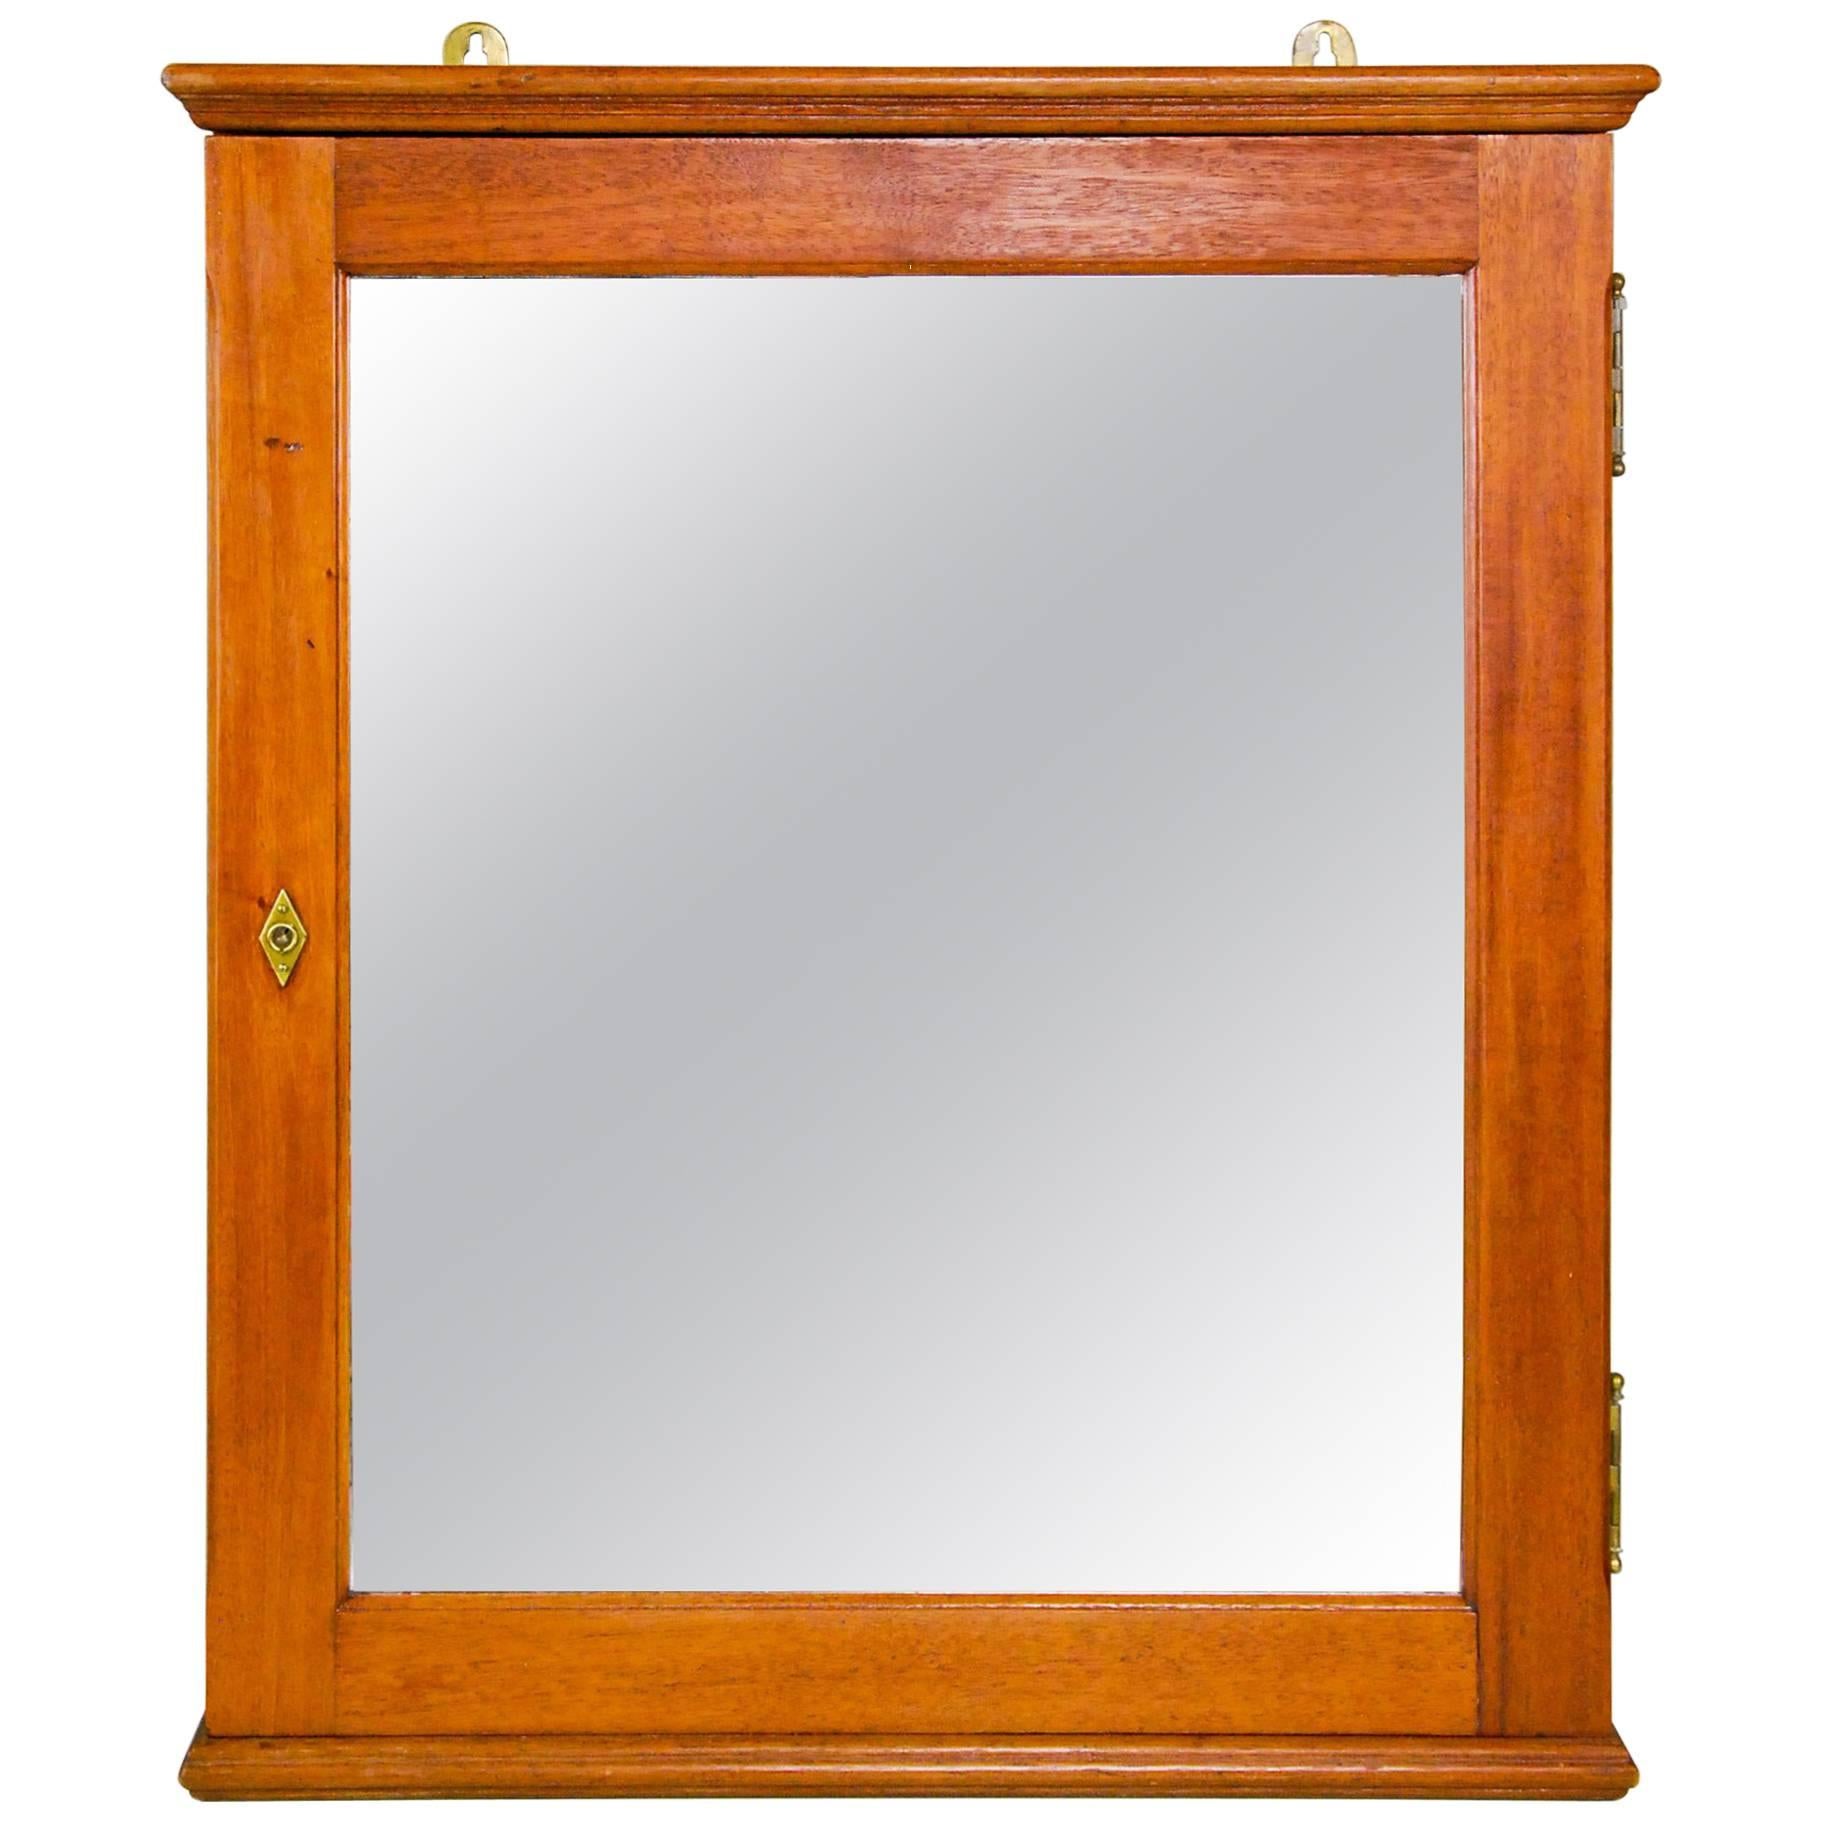 1920 Wall-Mounted Pharmacy Bathroom Cabinet with Mirror